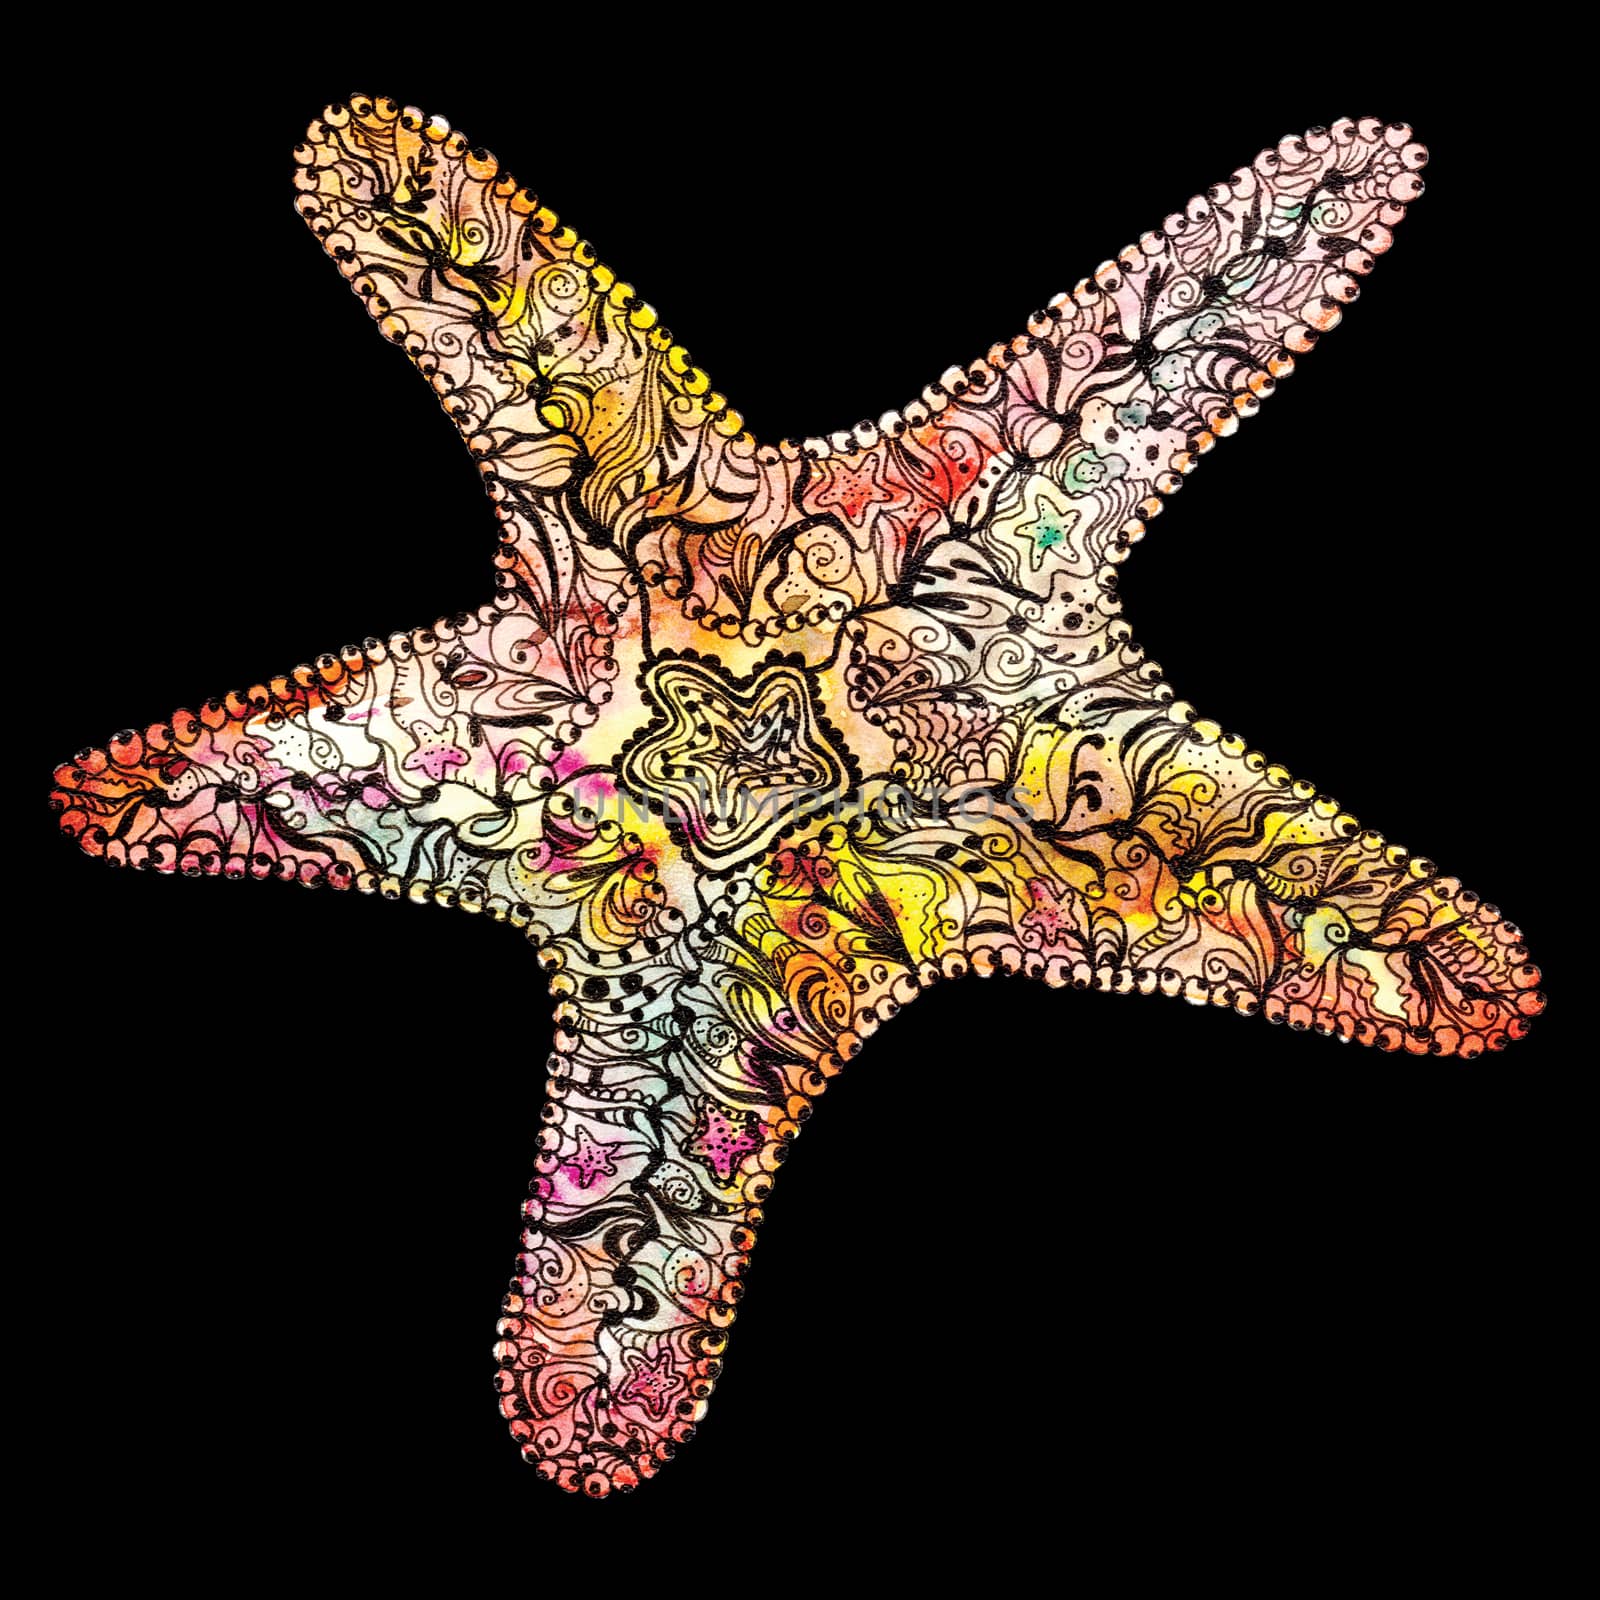 Star in sketch style with hand-painted ink ornaments on black background